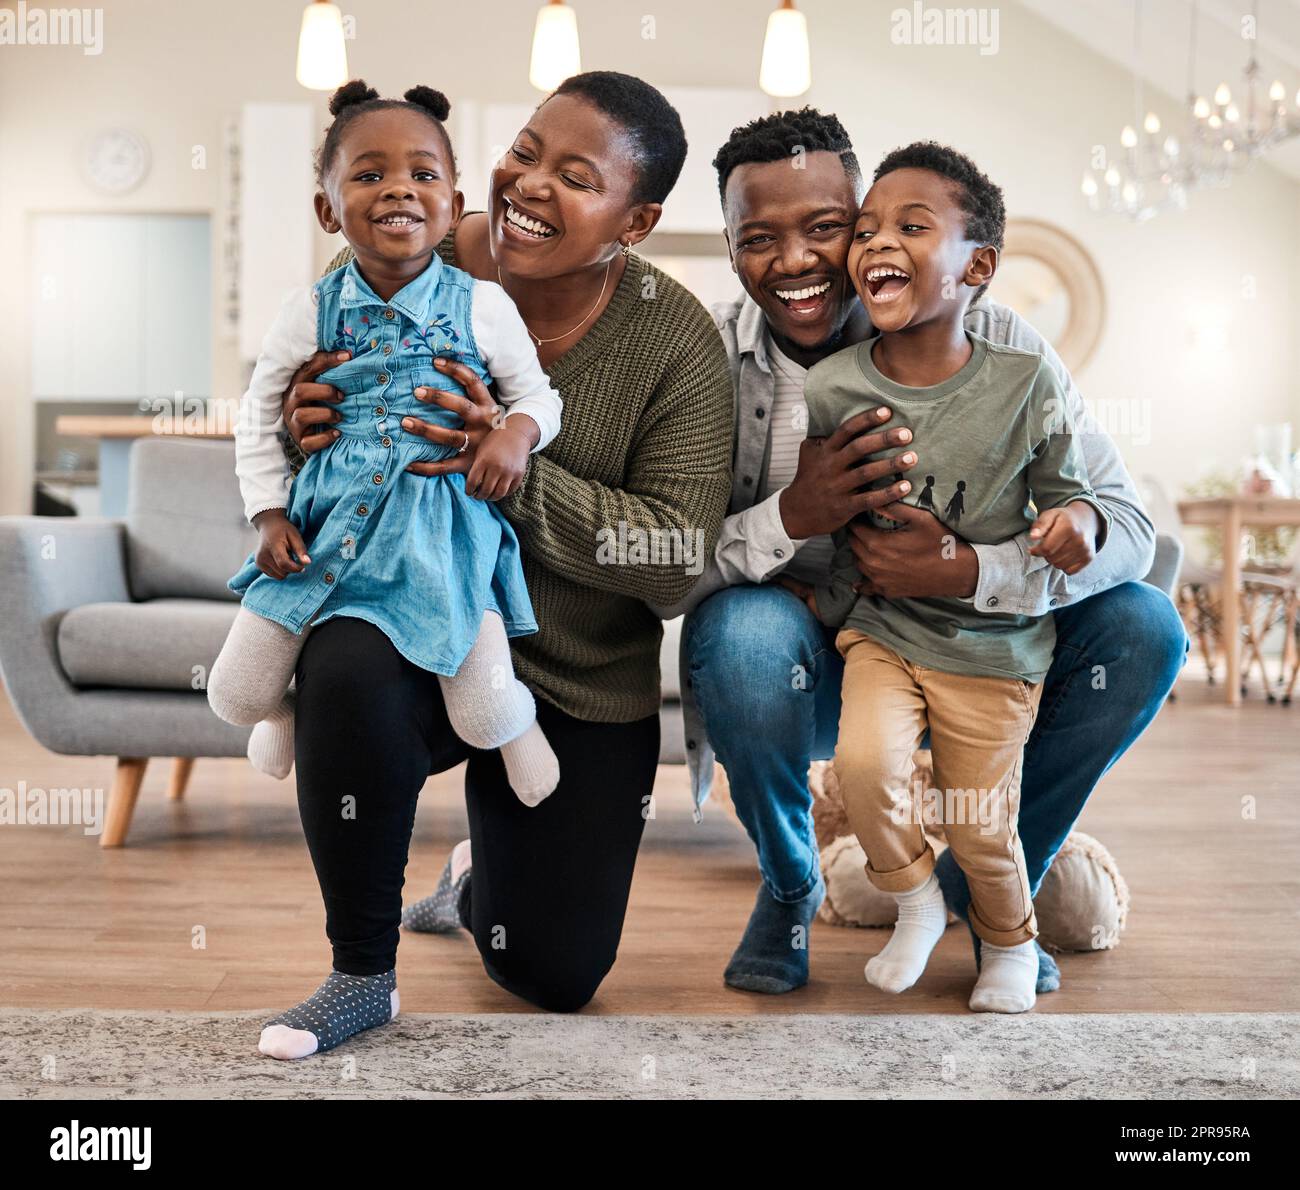 Family love, theres nothing quite like it. Portrait of a happy young family spending quality time at home. Stock Photo